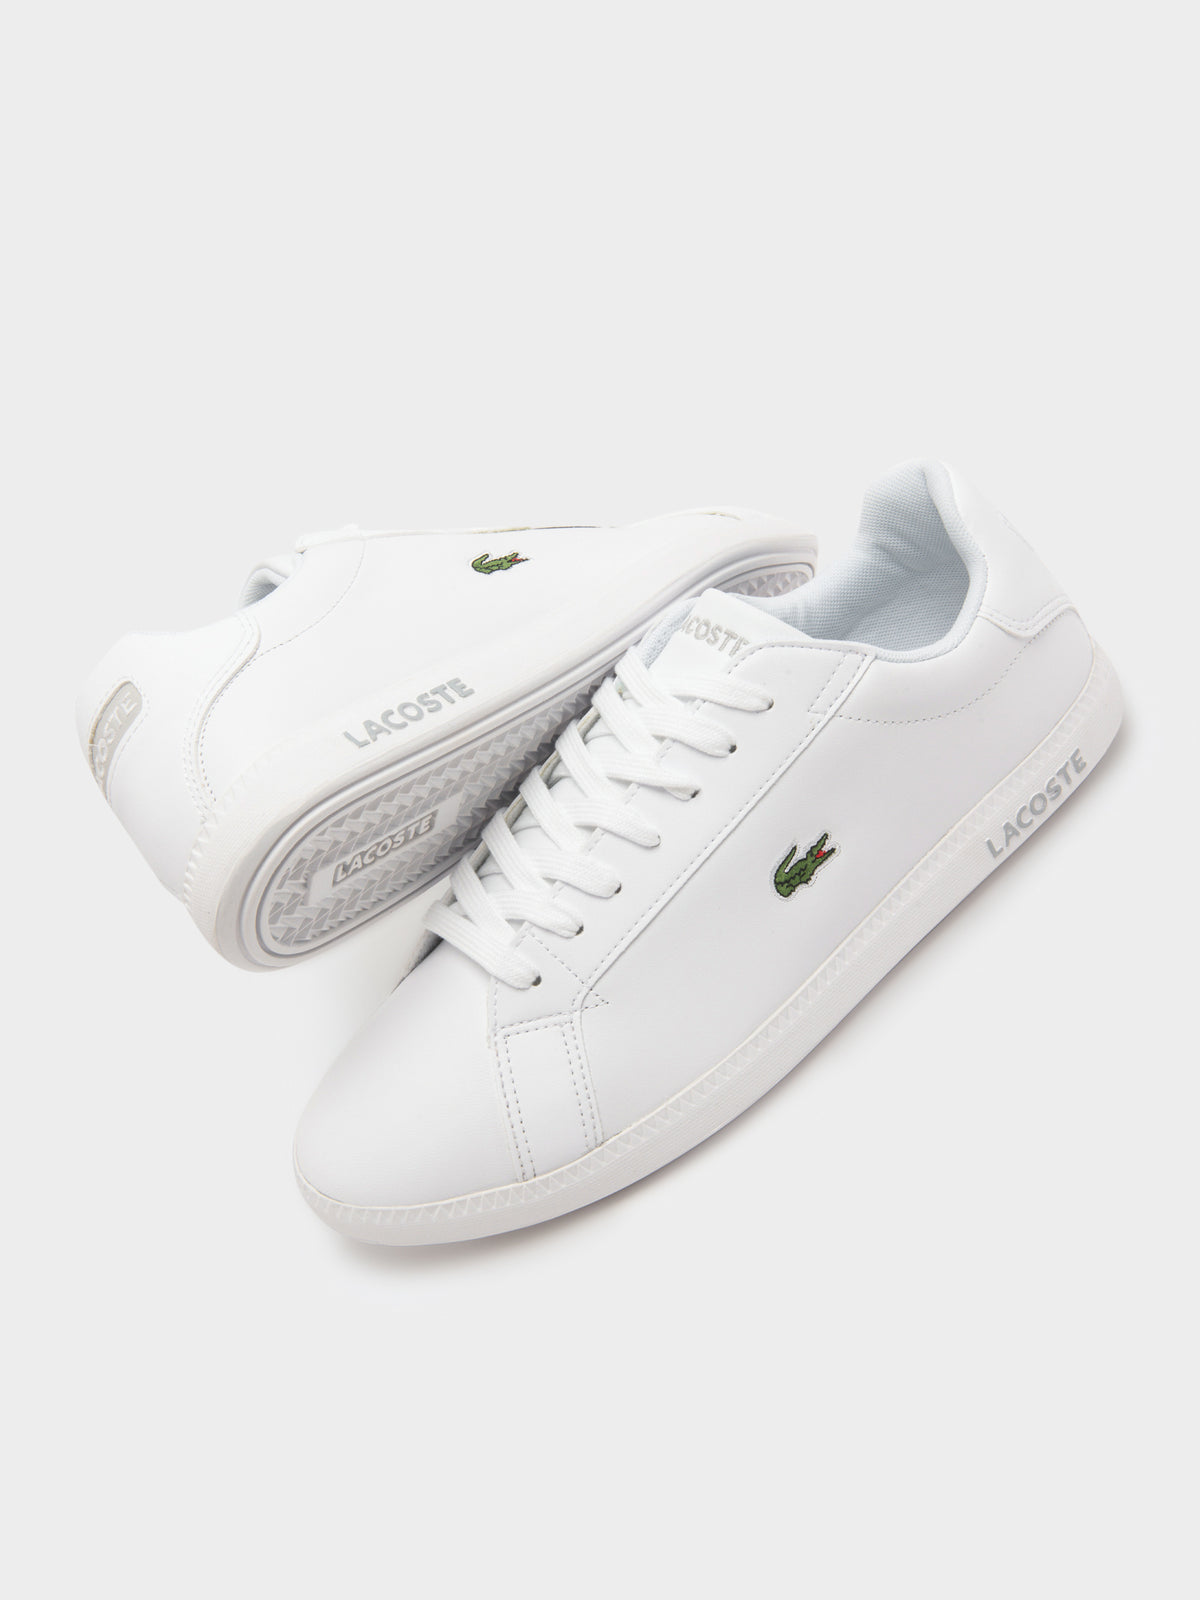 Womens Graduate BL Sneakers in White